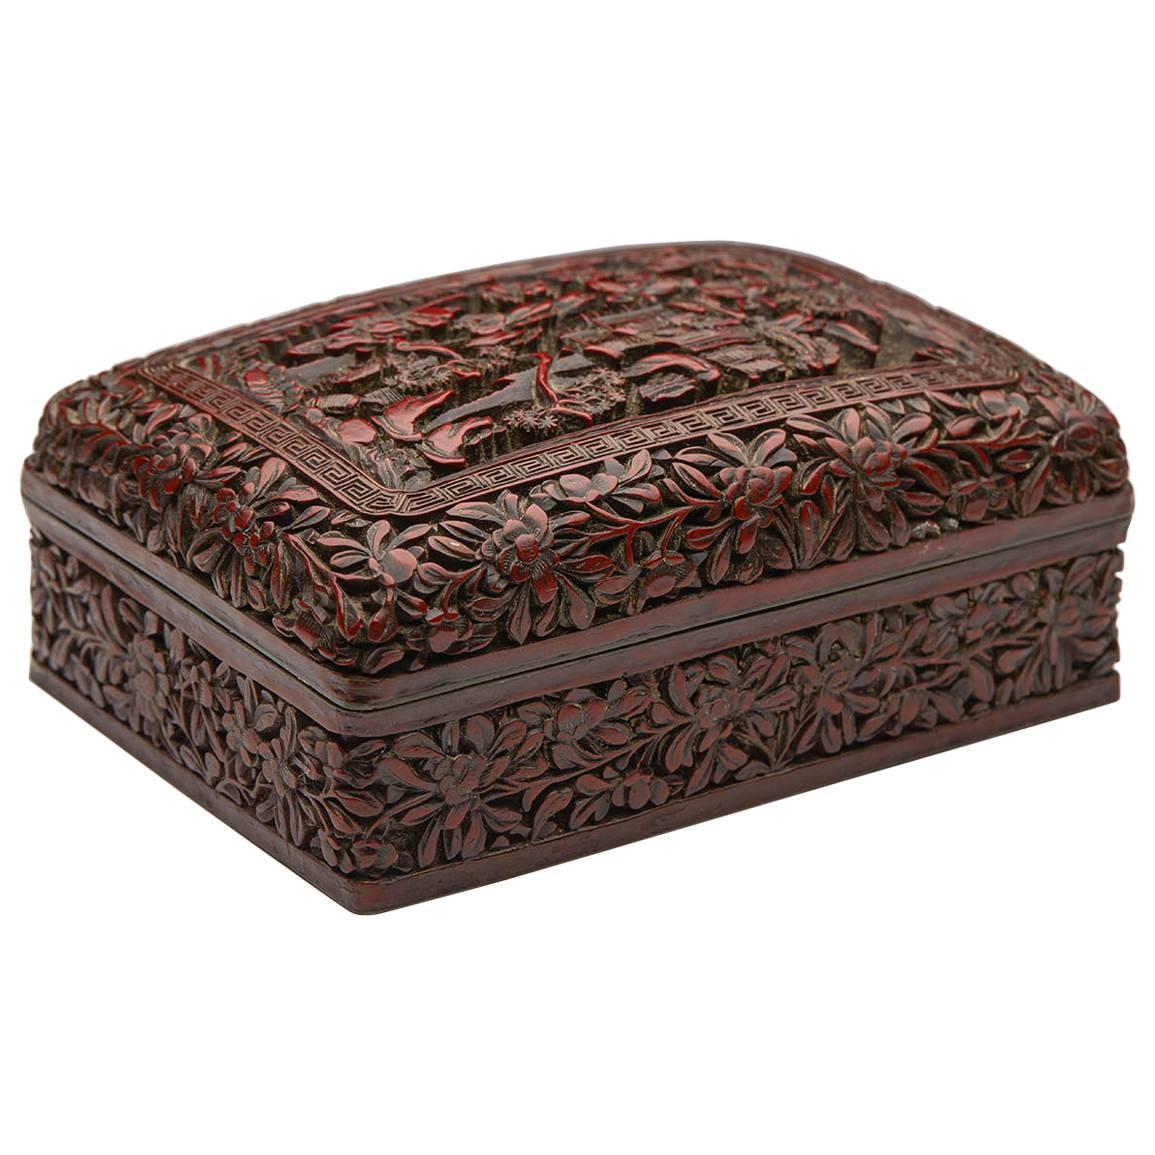 Antique Chinese Qing Cinnabar Lacquered Box, 19th Century